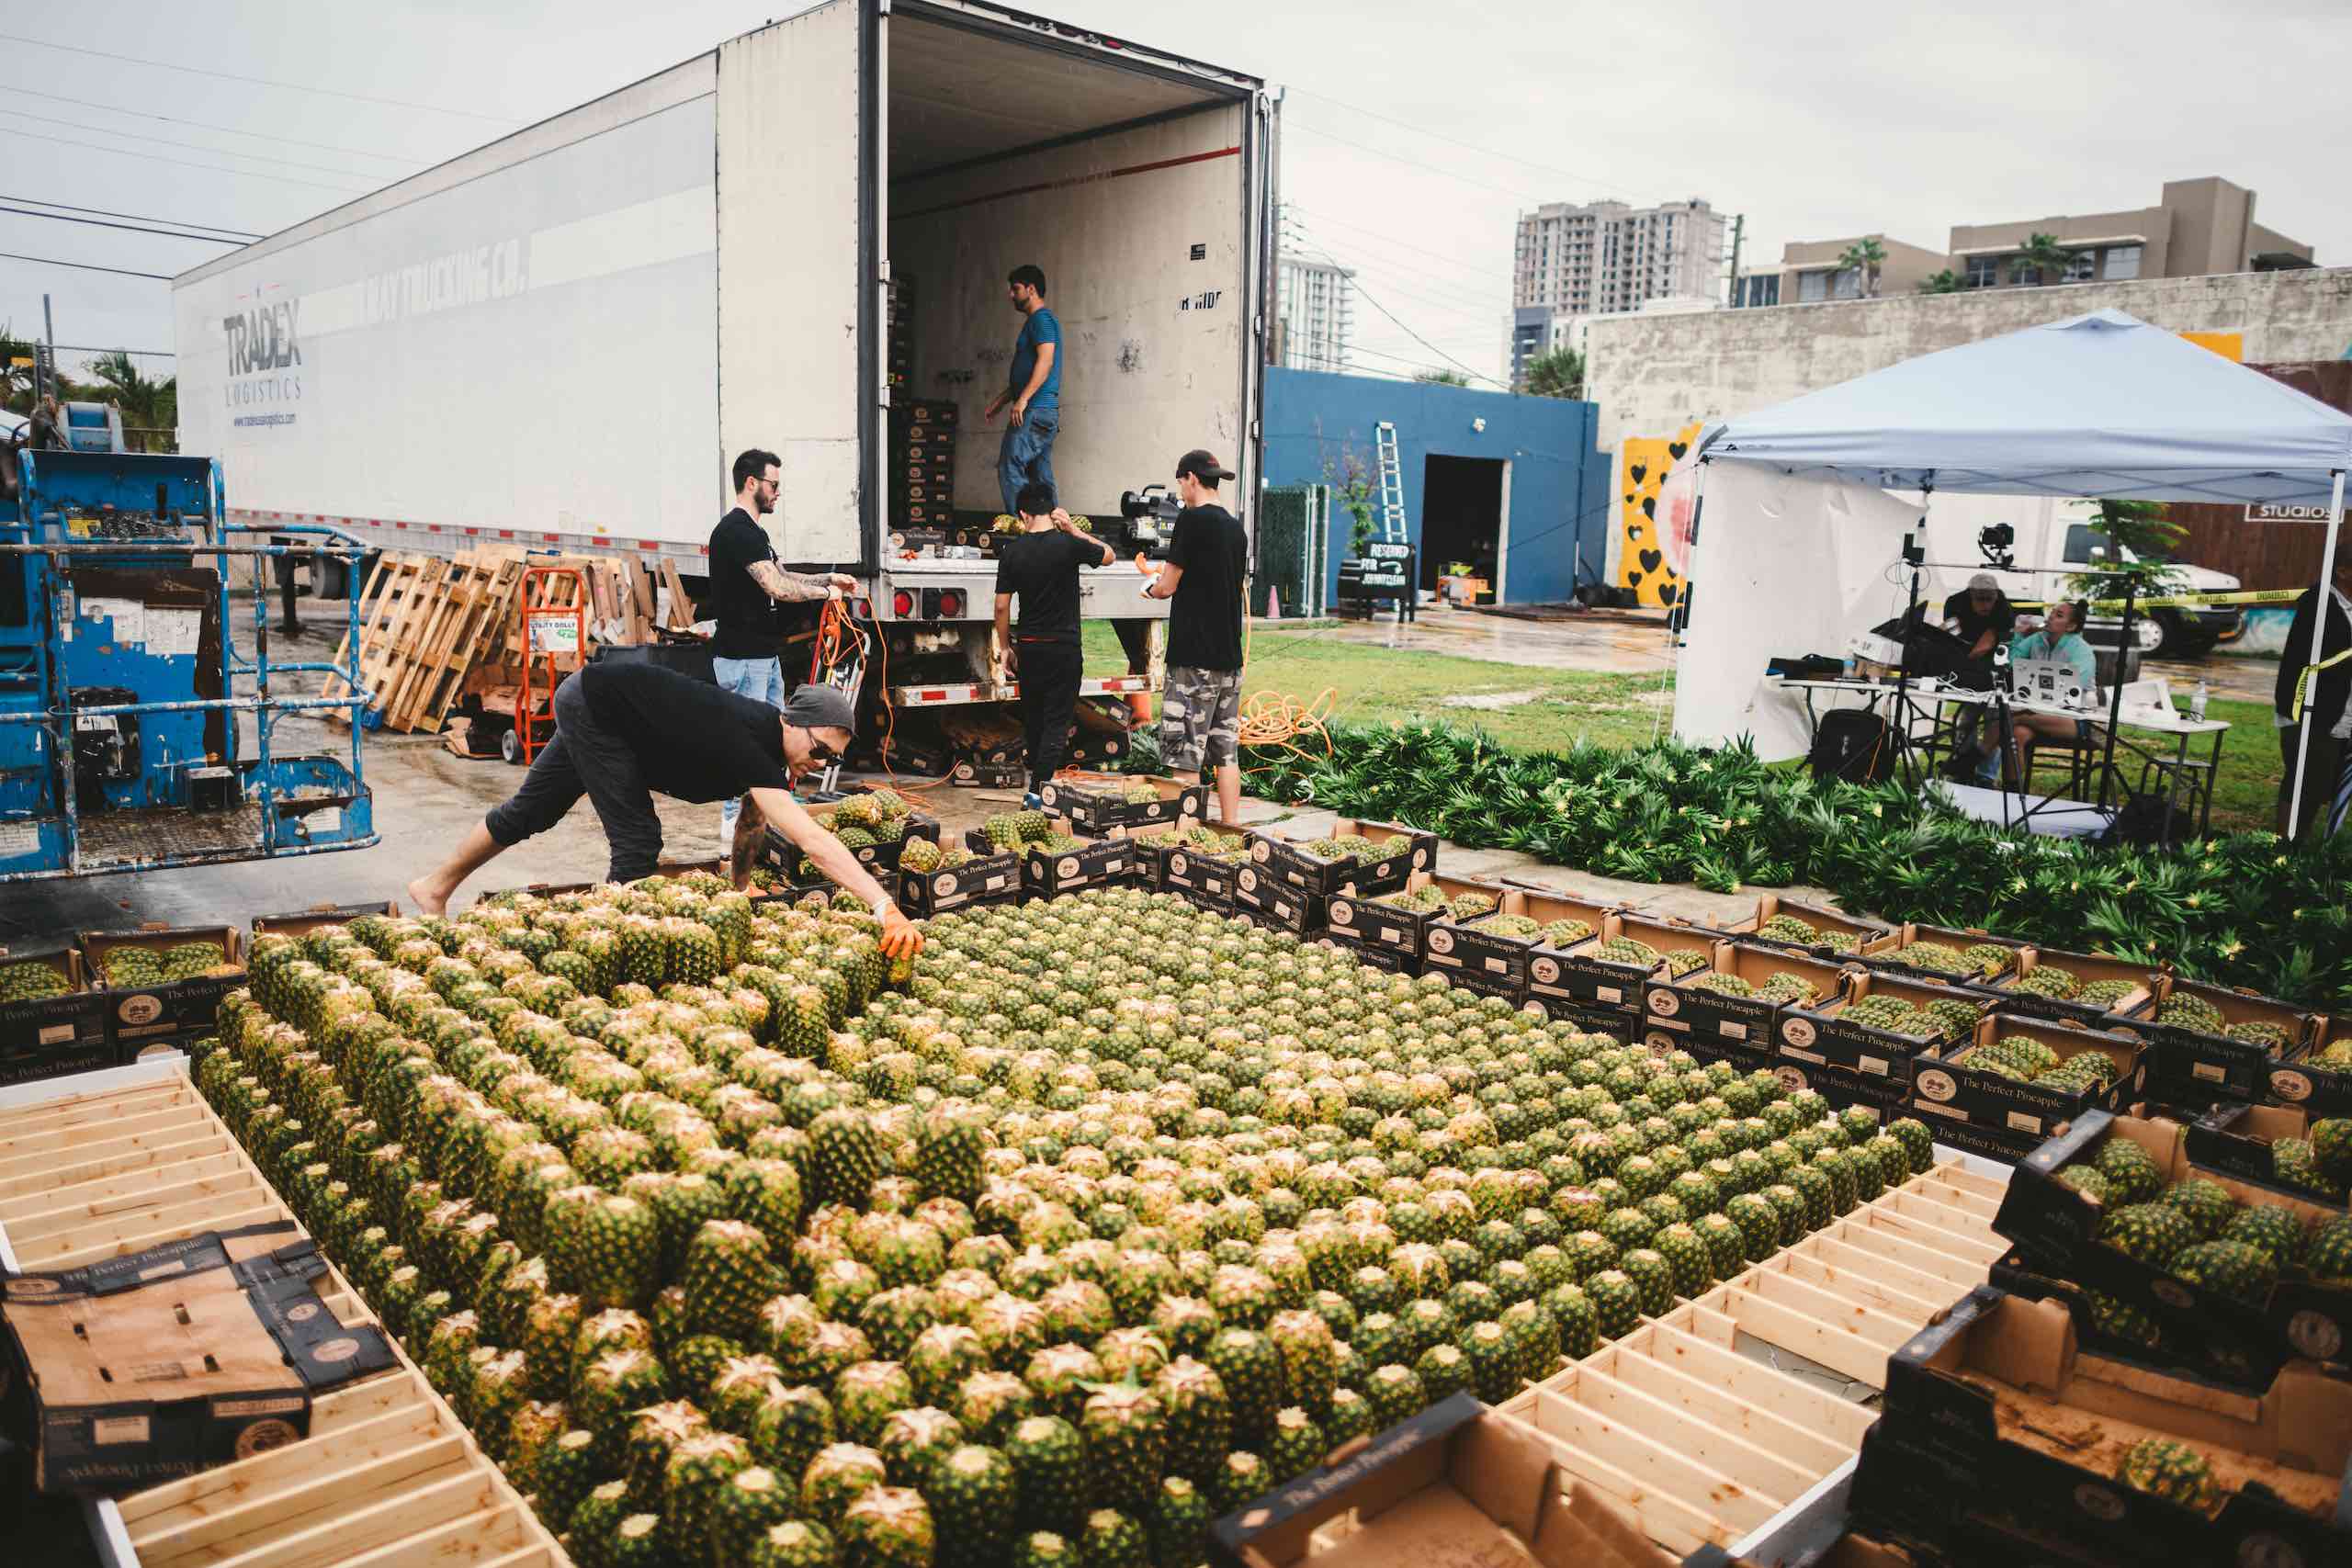 Artwalk 2018 May Pineapple Pyramid People working on unloading pineapples in boxes from the truck and assembling the pineapple pyramid with boxes of pineapples and pallets surrounding it